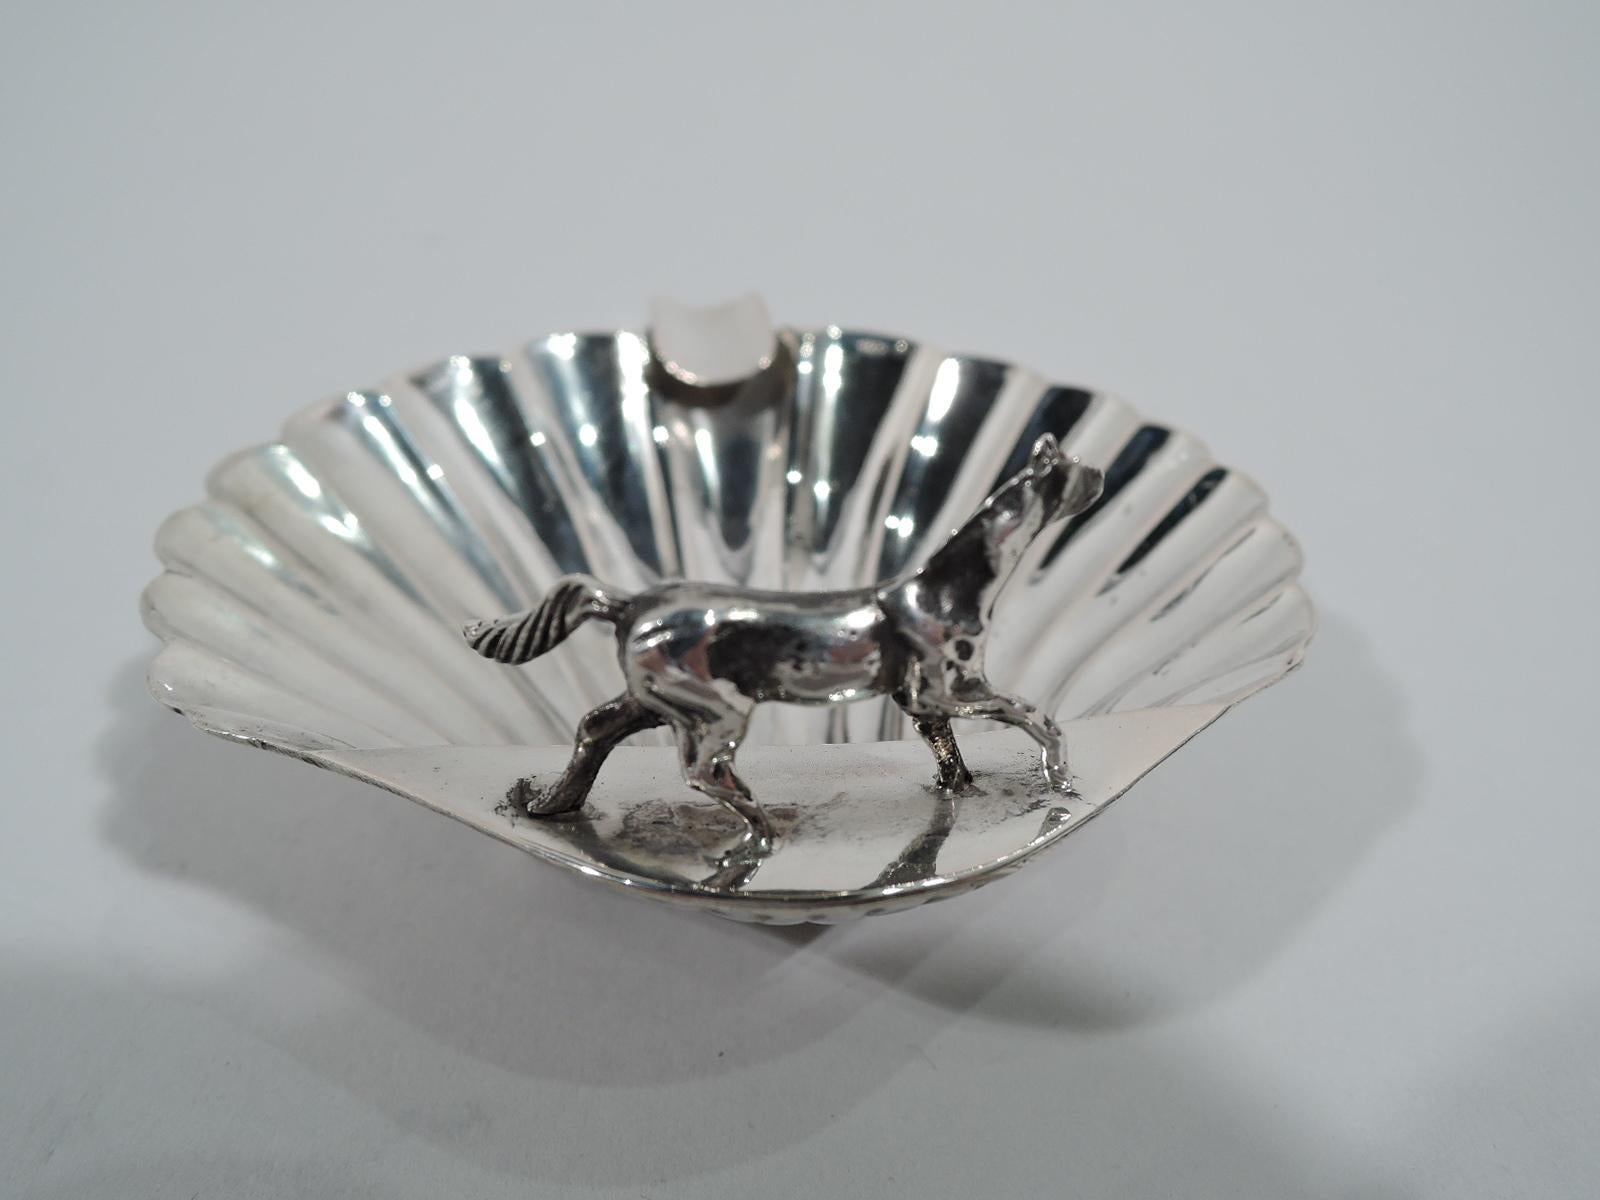 Midcentury Modern 800 silver ashtray. A scallop shell mounted with cradle and cast horse figure. Three ball supports. Marked “800” with unidentified Italian mark (1944-68). Weight: 1.6 troy ounces.